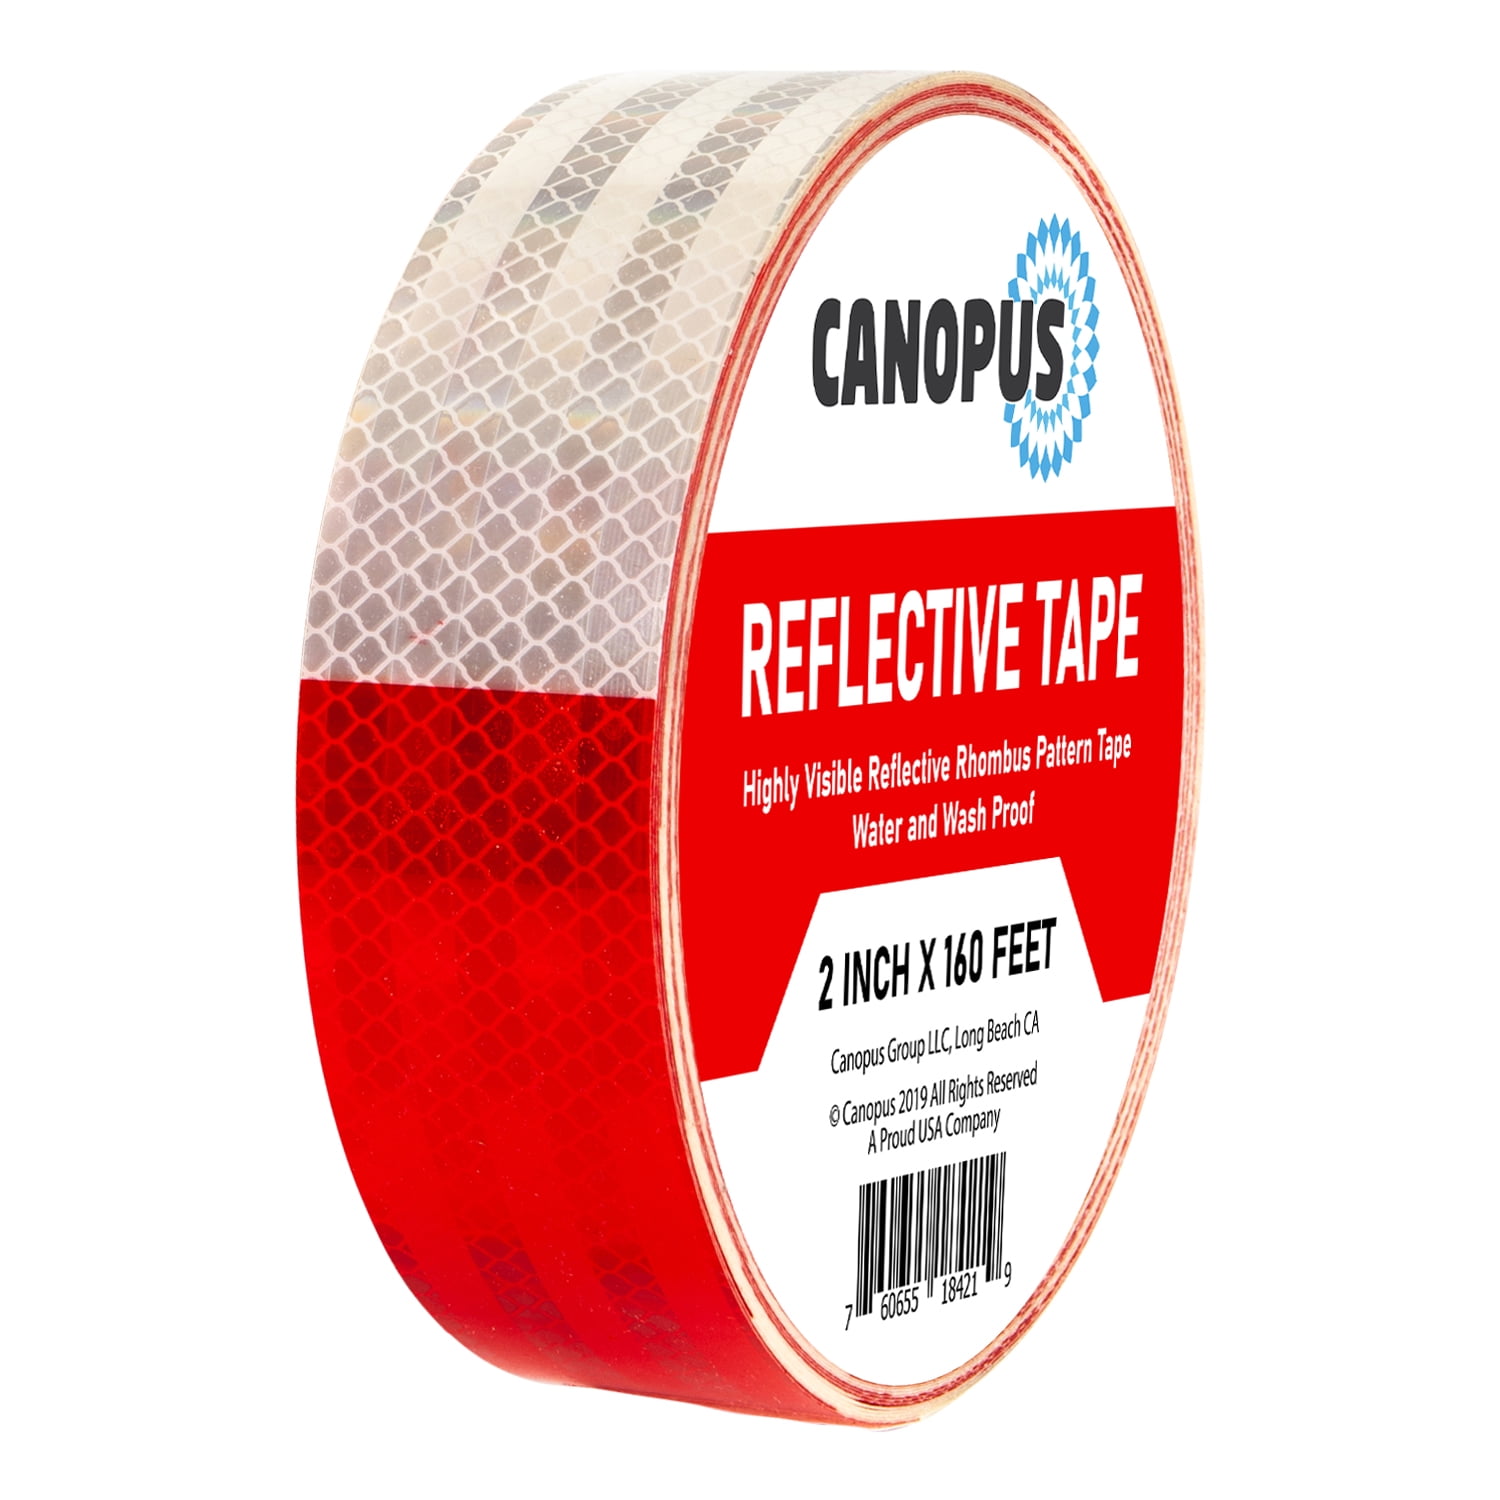 Starrey Reflective Tape Red White 1 in X 75 FT Waterproof Self 1 IN X 75 FT 